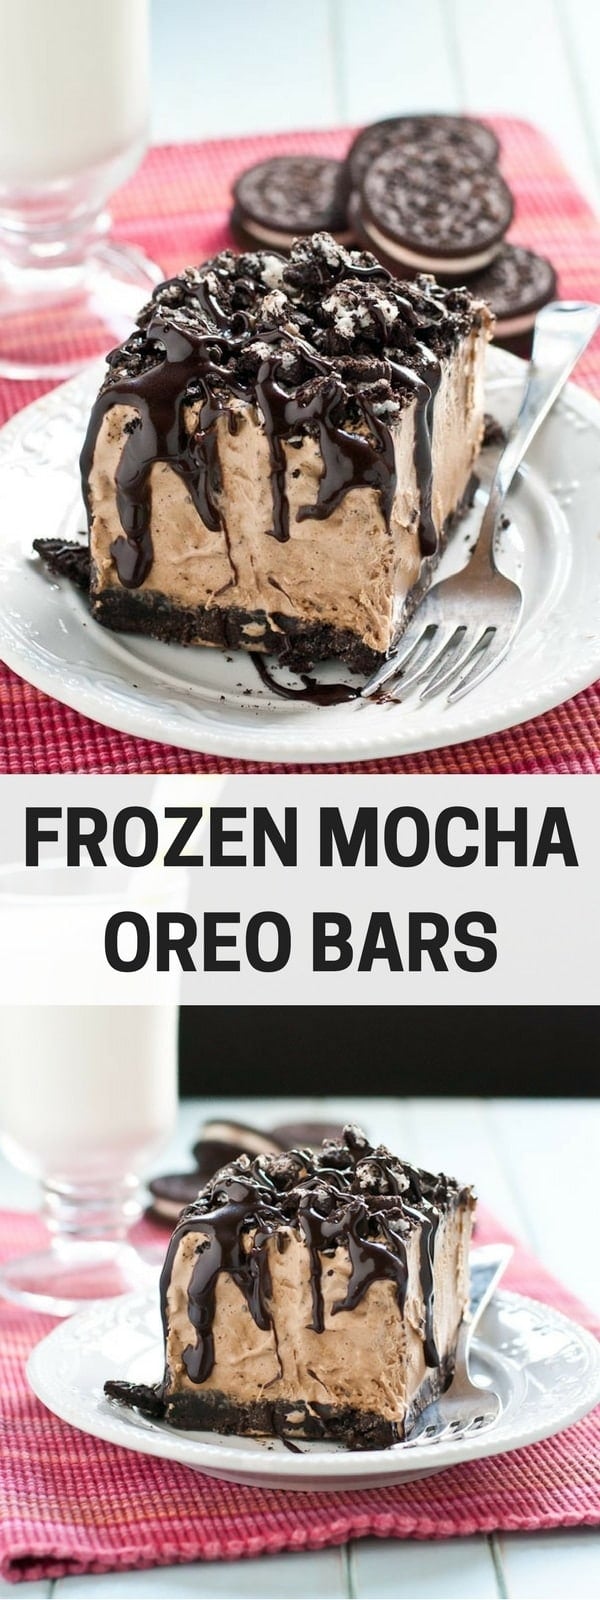 These Frozen Mocha Oreo Bars are a great summer dessert loaded with rich chocolate and coffee flavor!